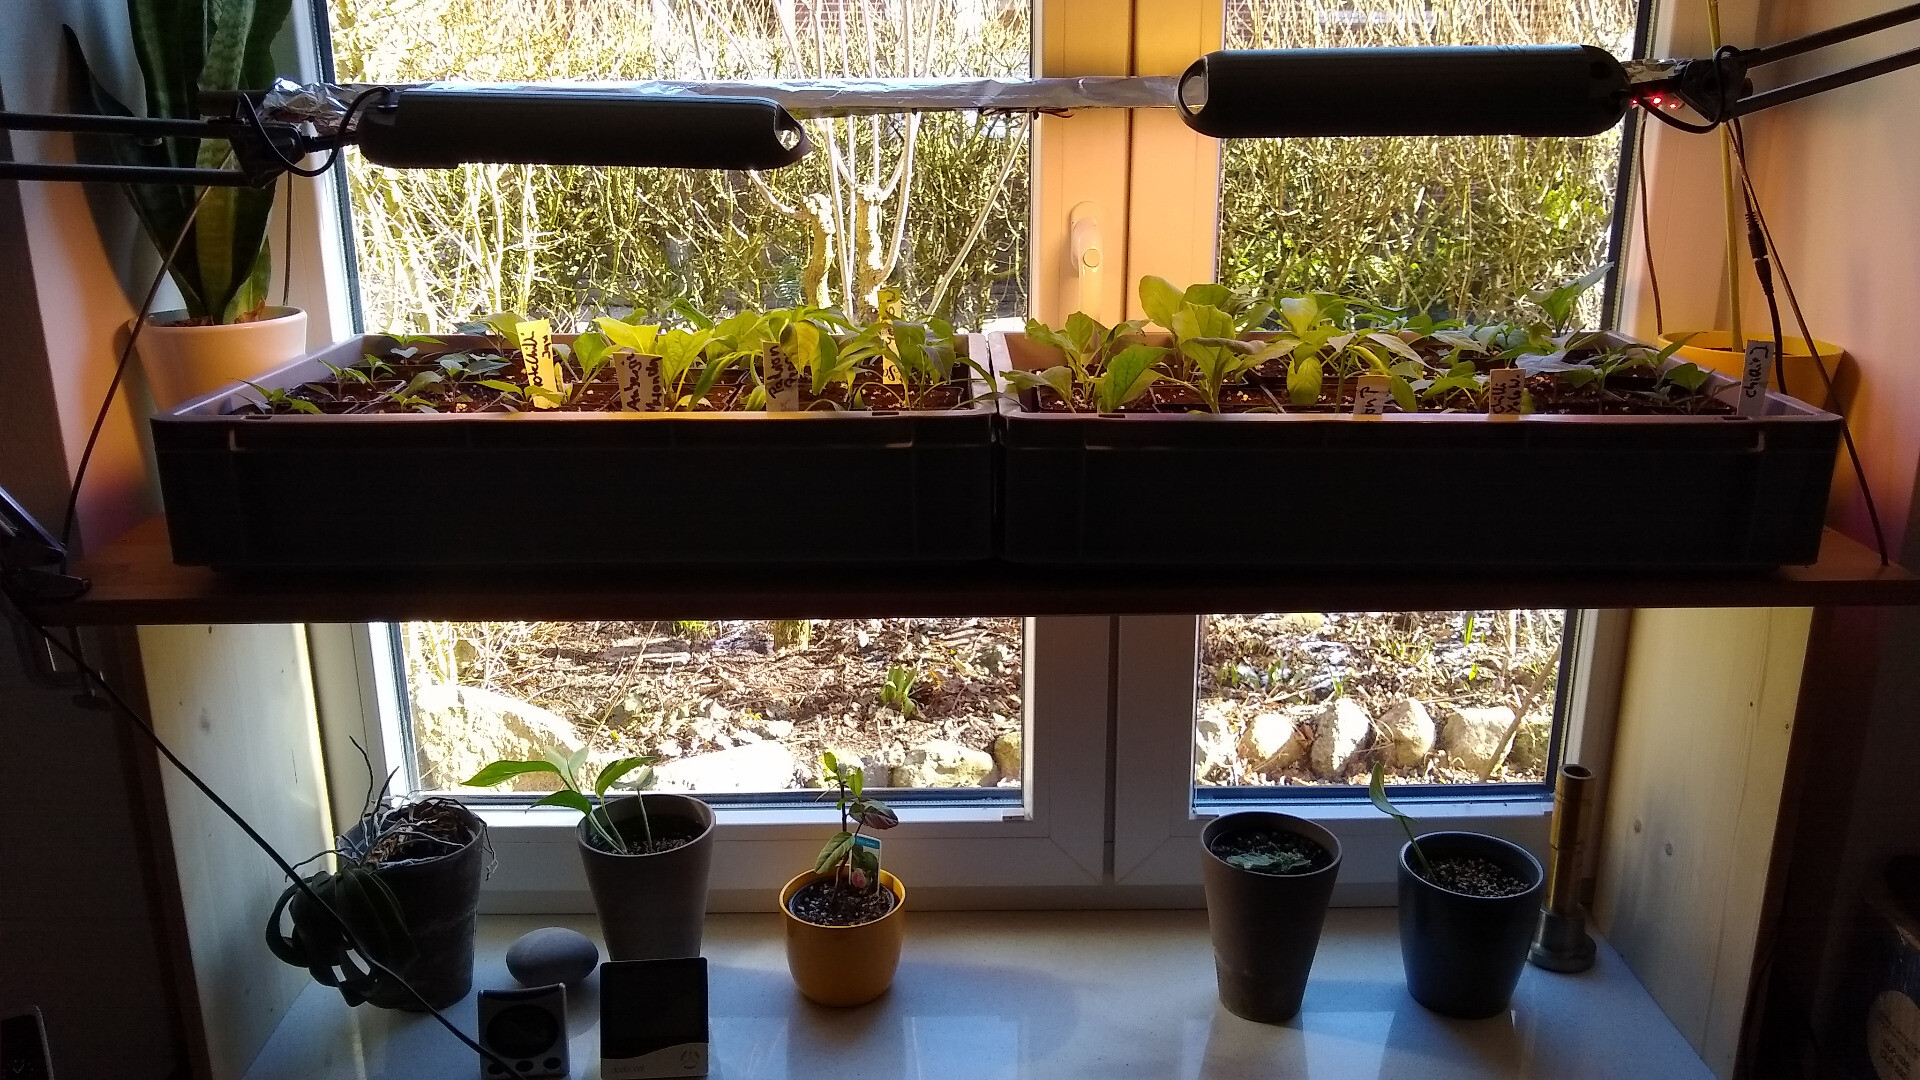 makeshift propagation shelf with self-watering euroboxes and plants